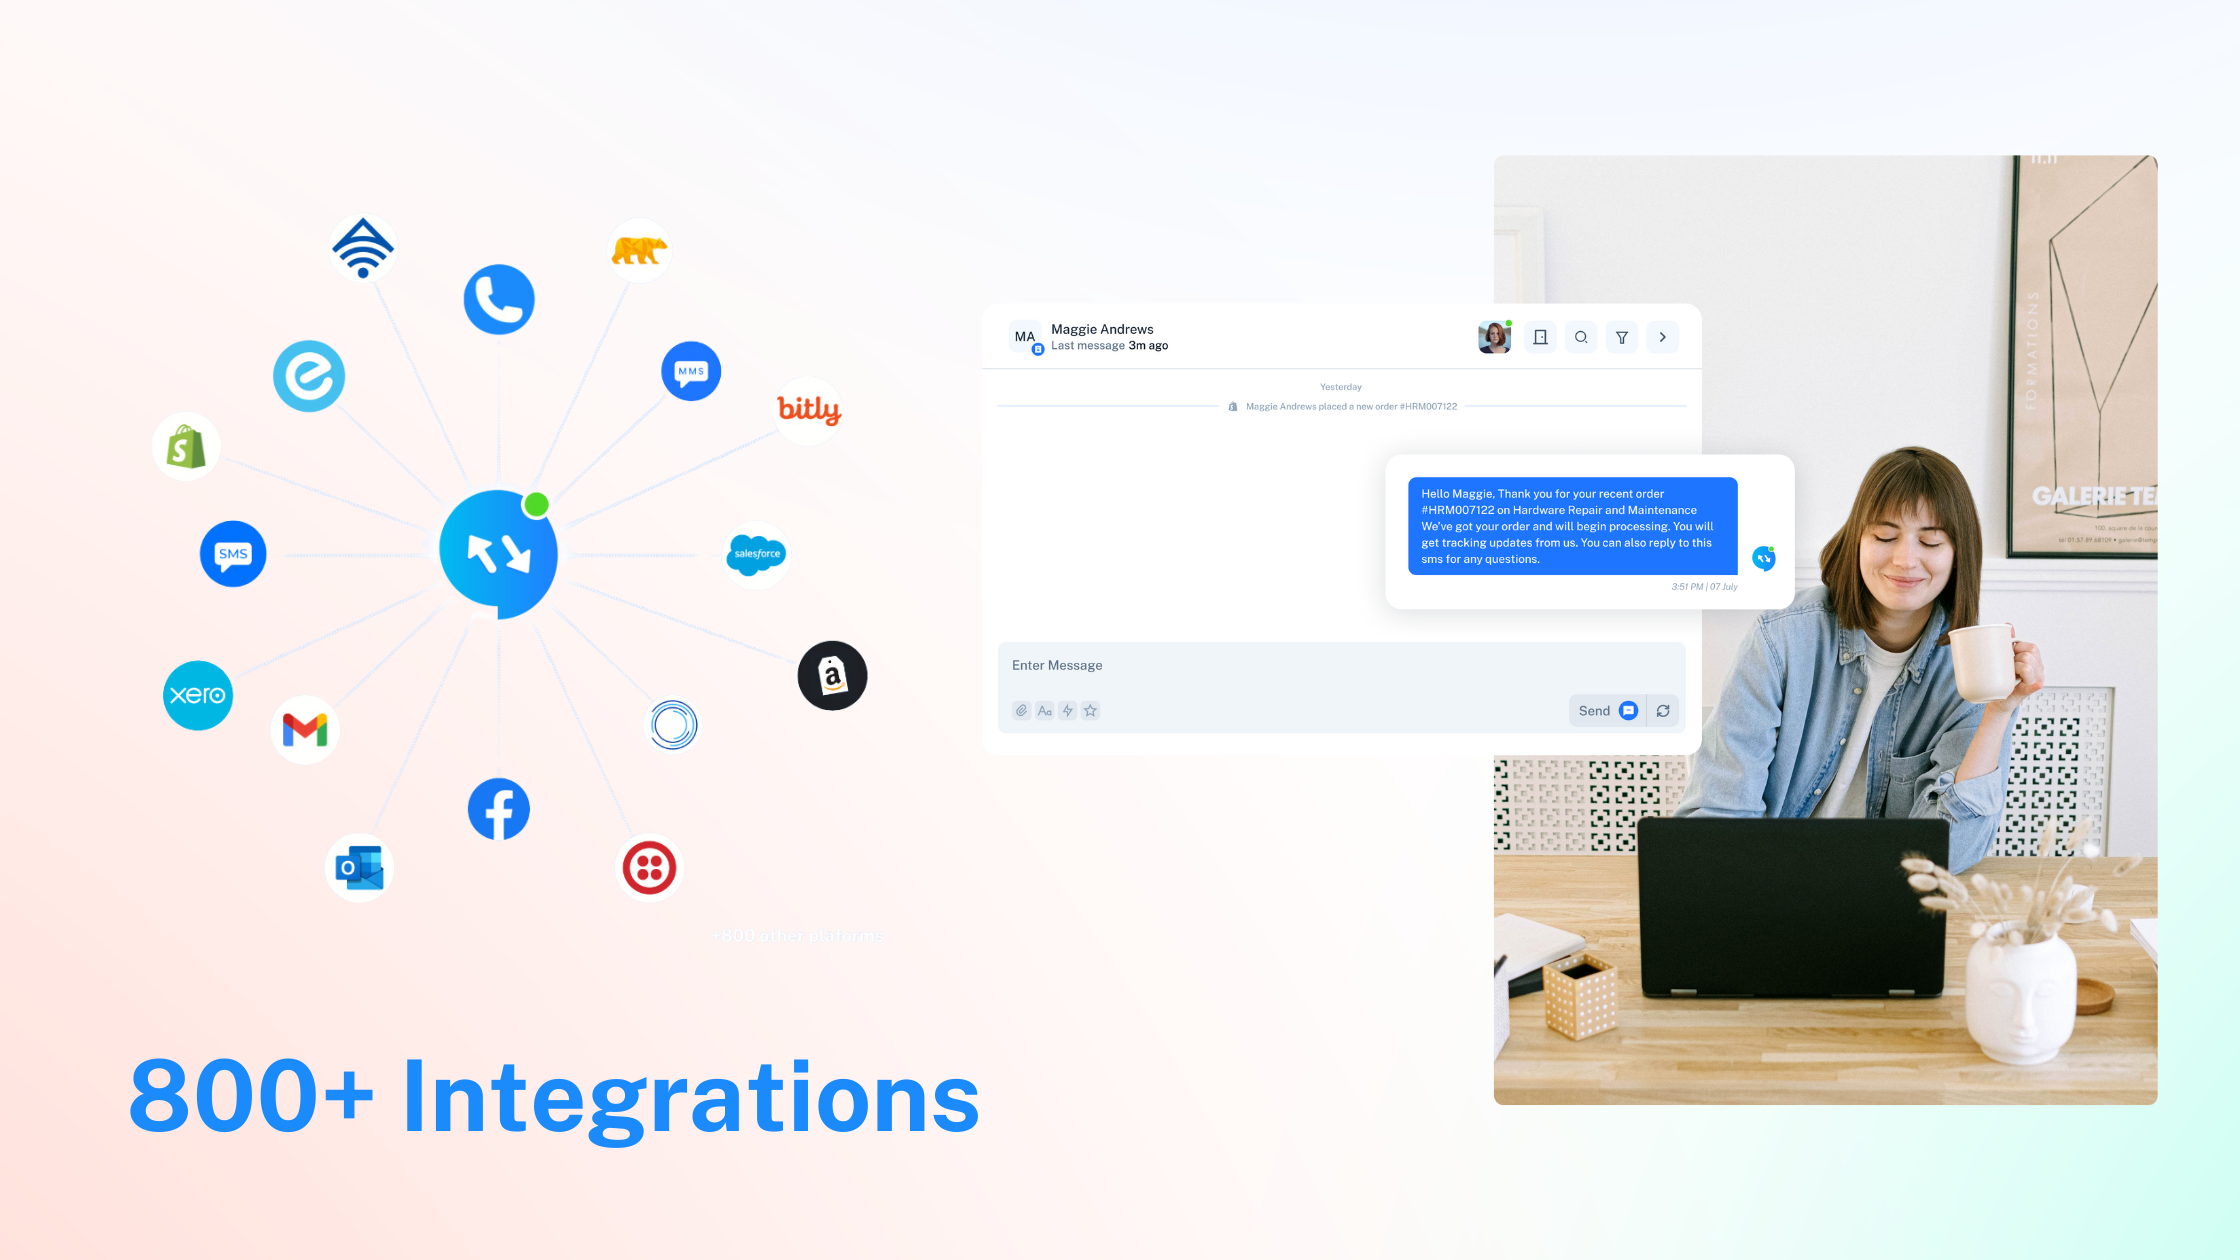 With over 800 integrations and counting, we plan on bringing you all the platforms into one simple chat. 